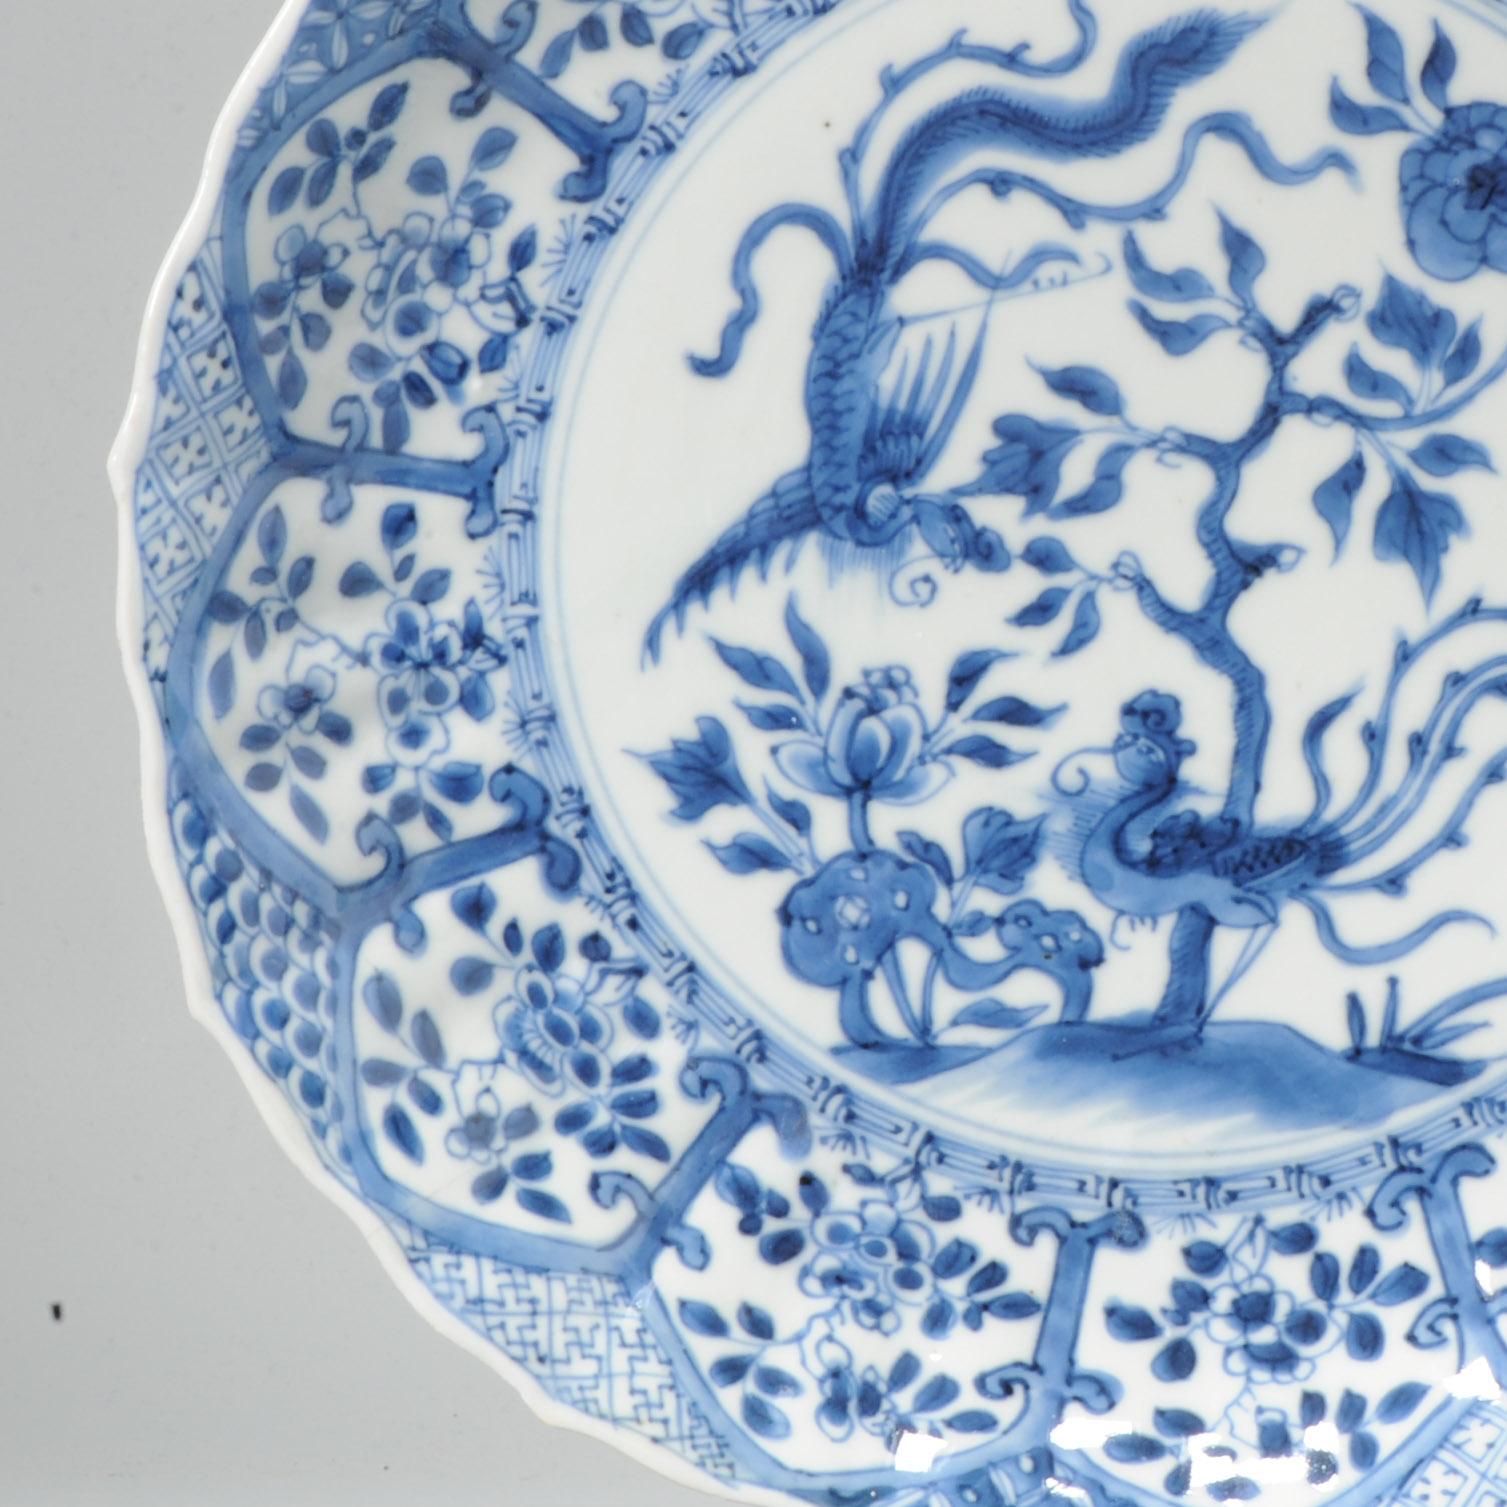 Larger Antique Chinese Porcelain Ca 1700 Kangxi Period Period Fenghuang Plate In Good Condition For Sale In Amsterdam, Noord Holland